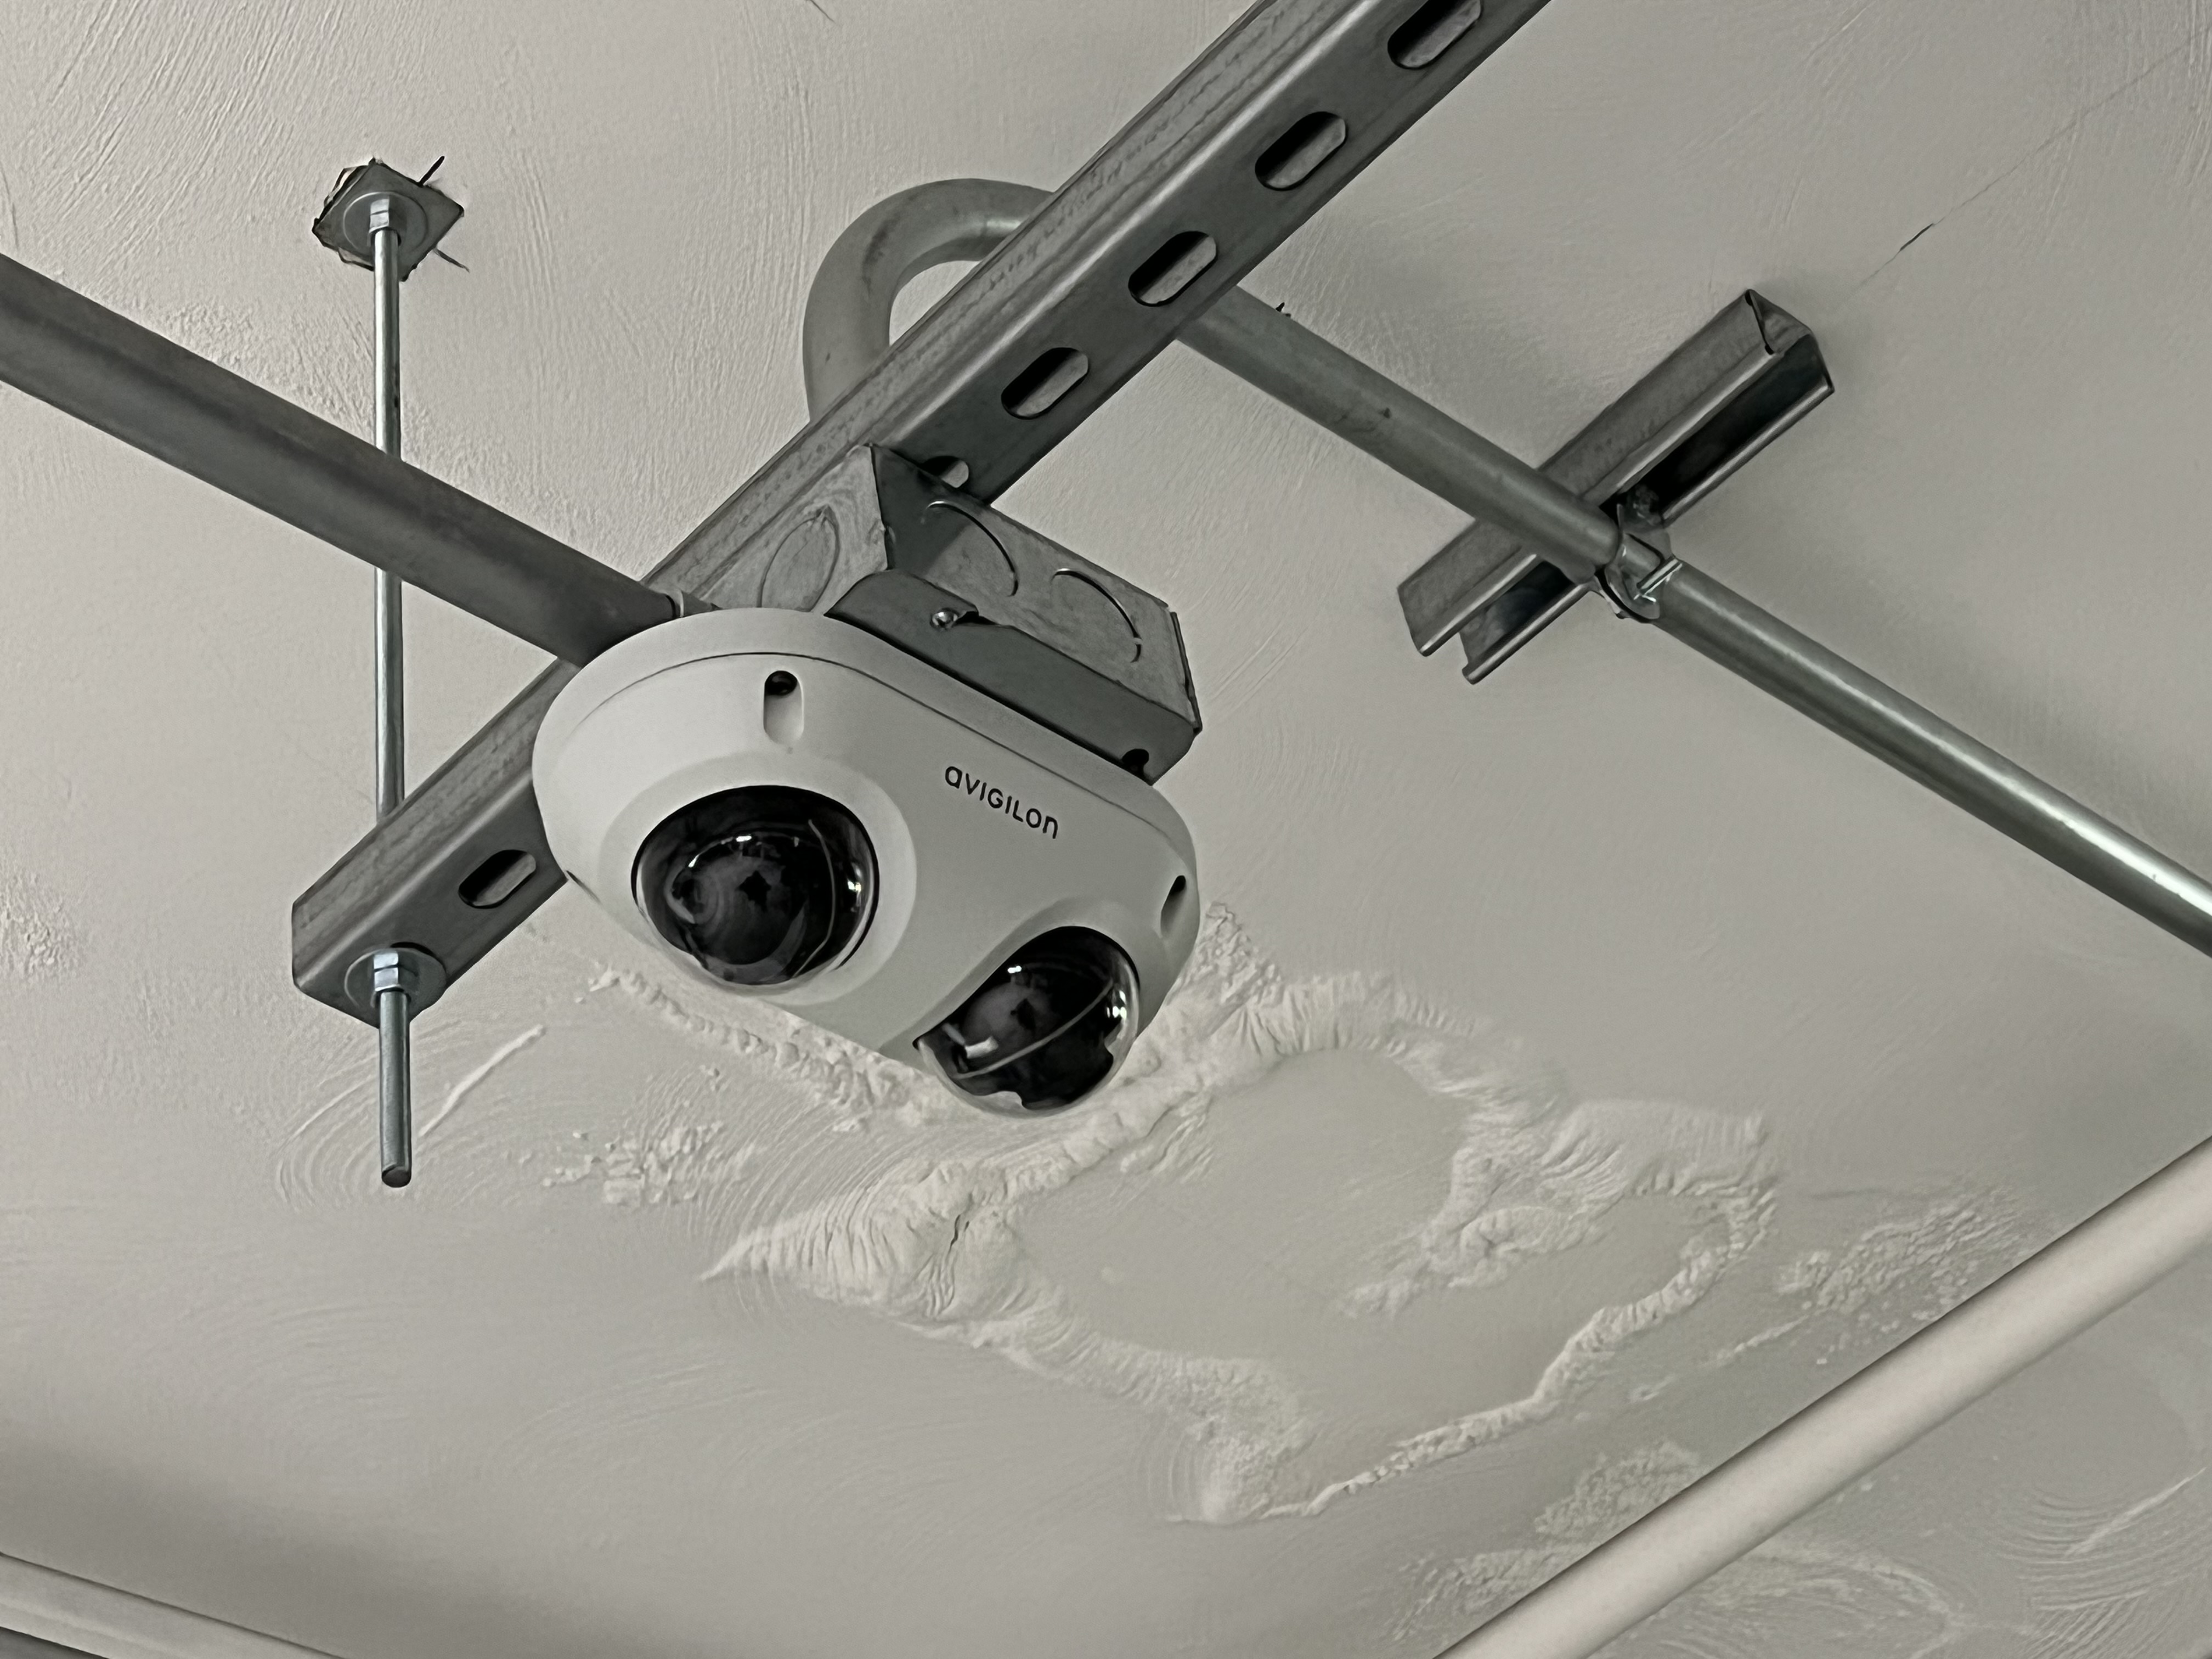 A camera system hangs from a ceiling.